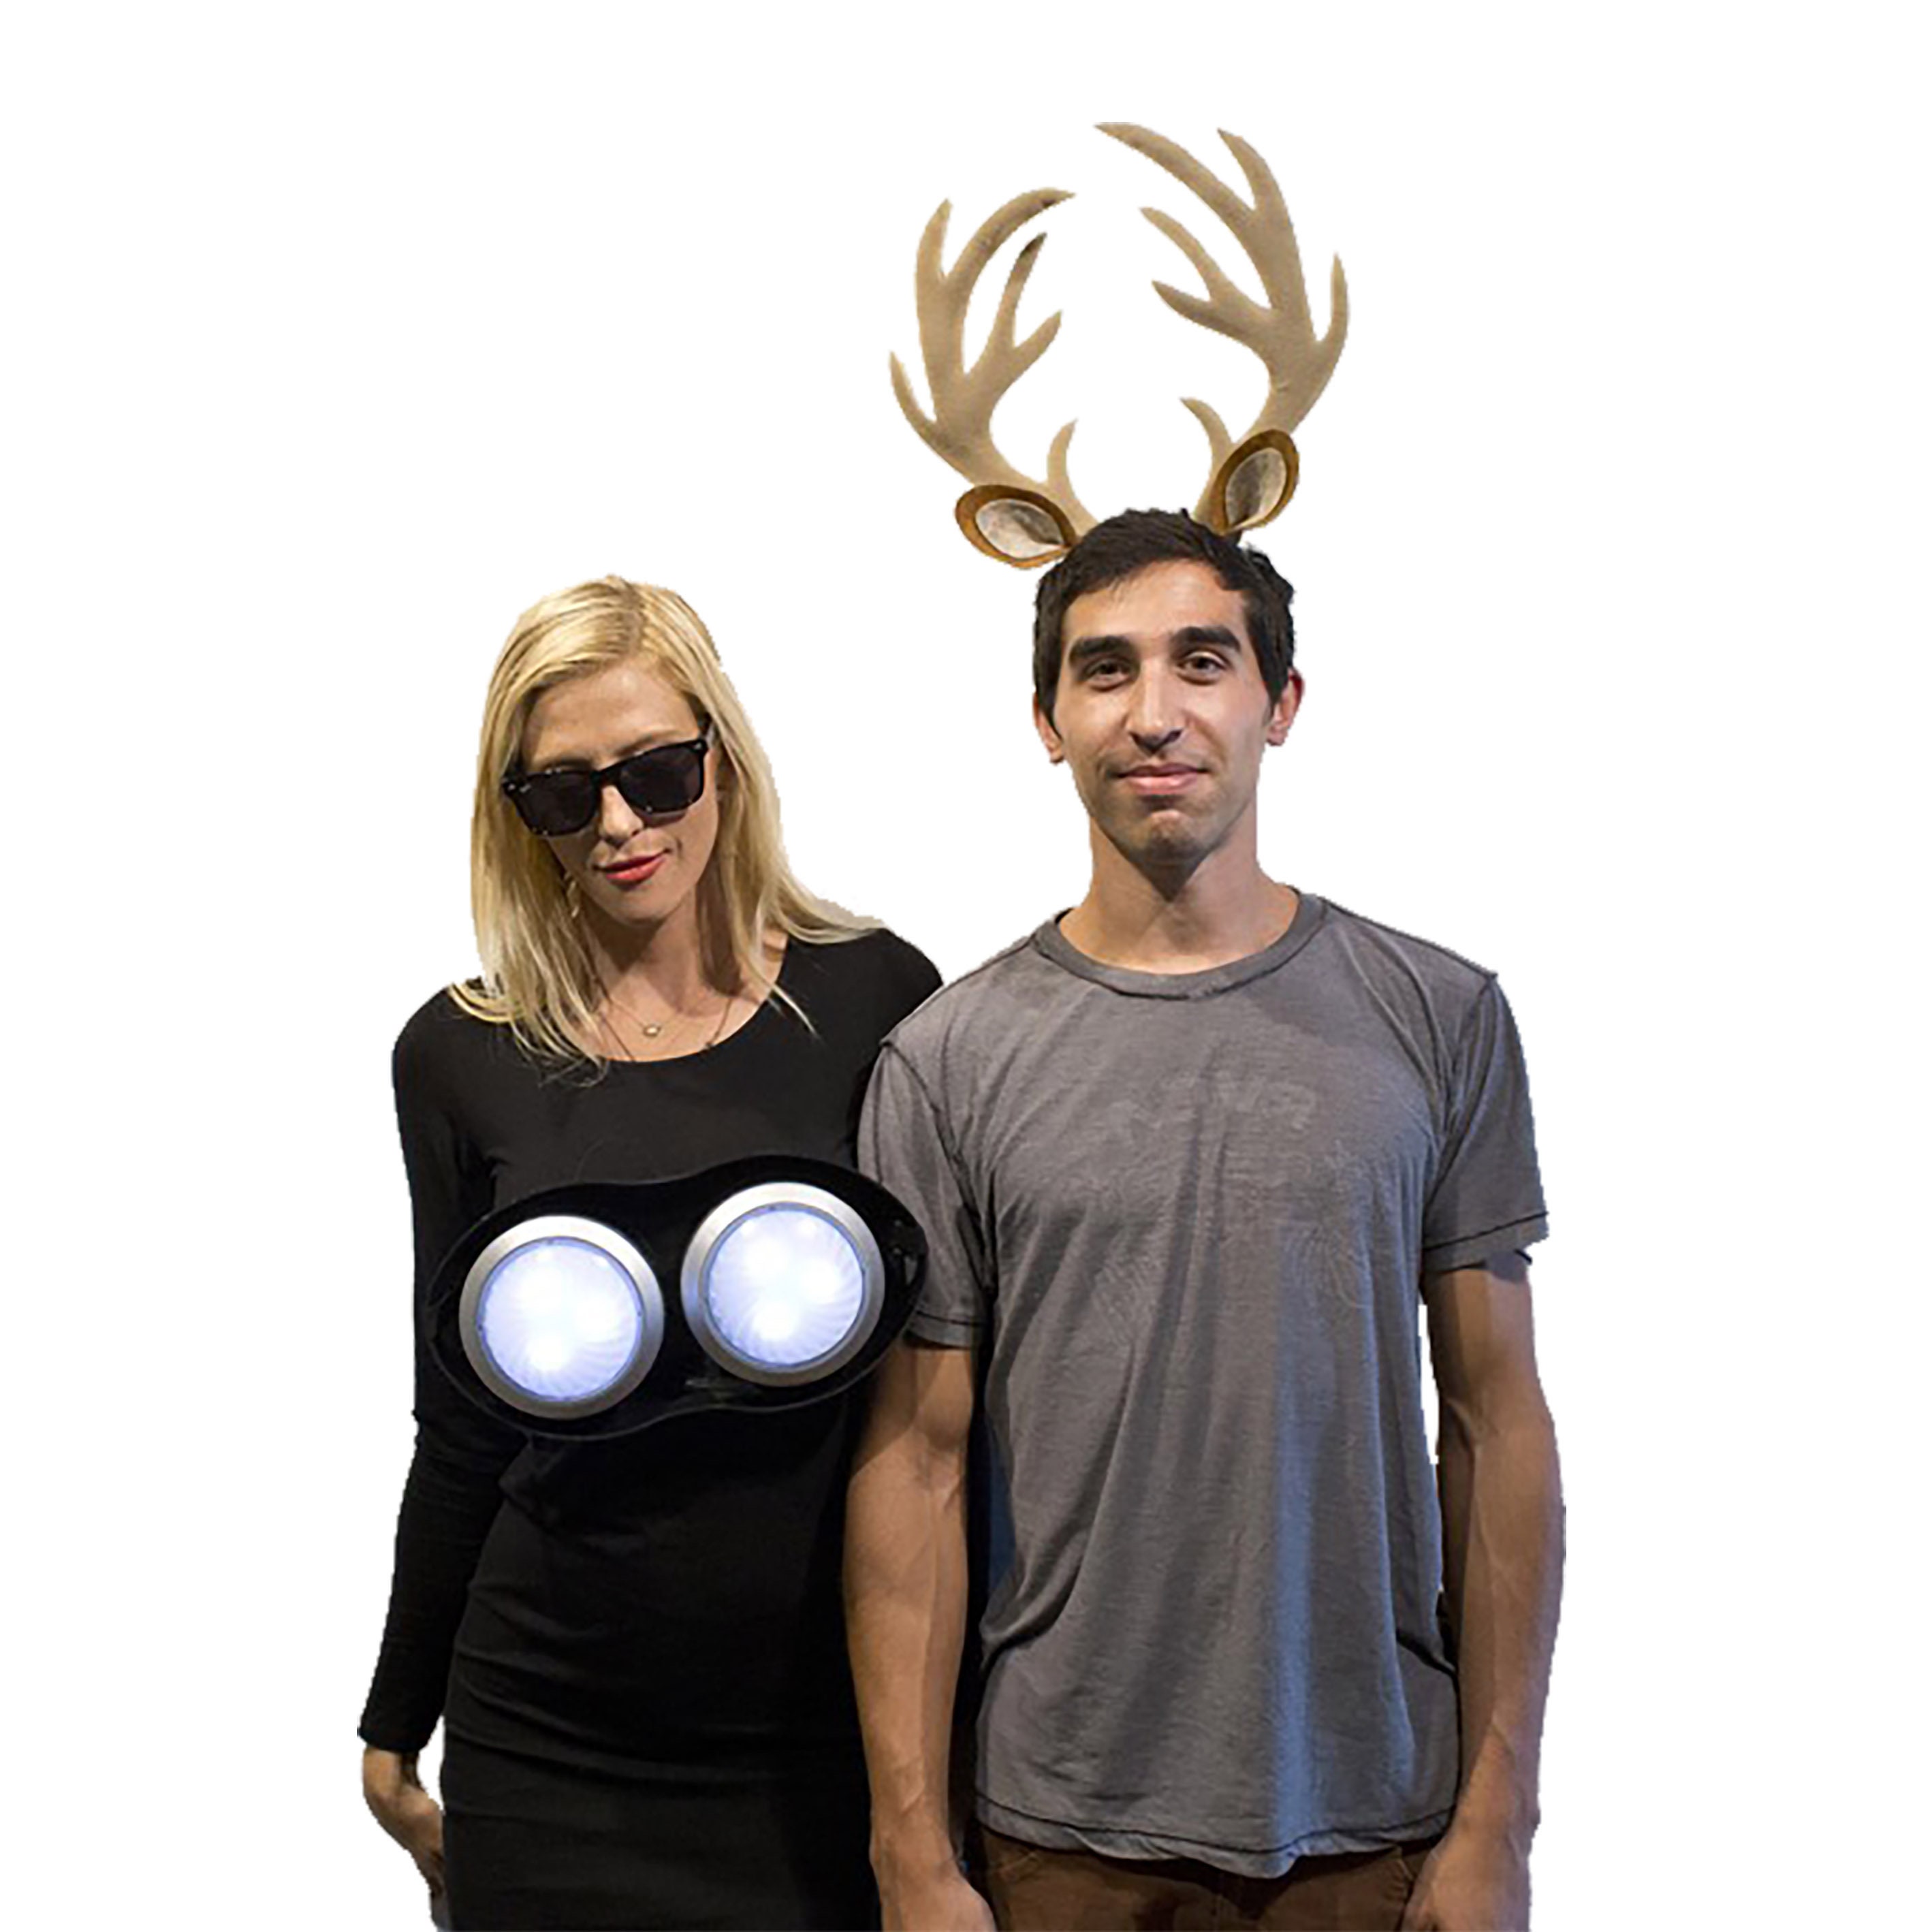 Deer in the Headlights Couples Halloween Costume Pun Play on image